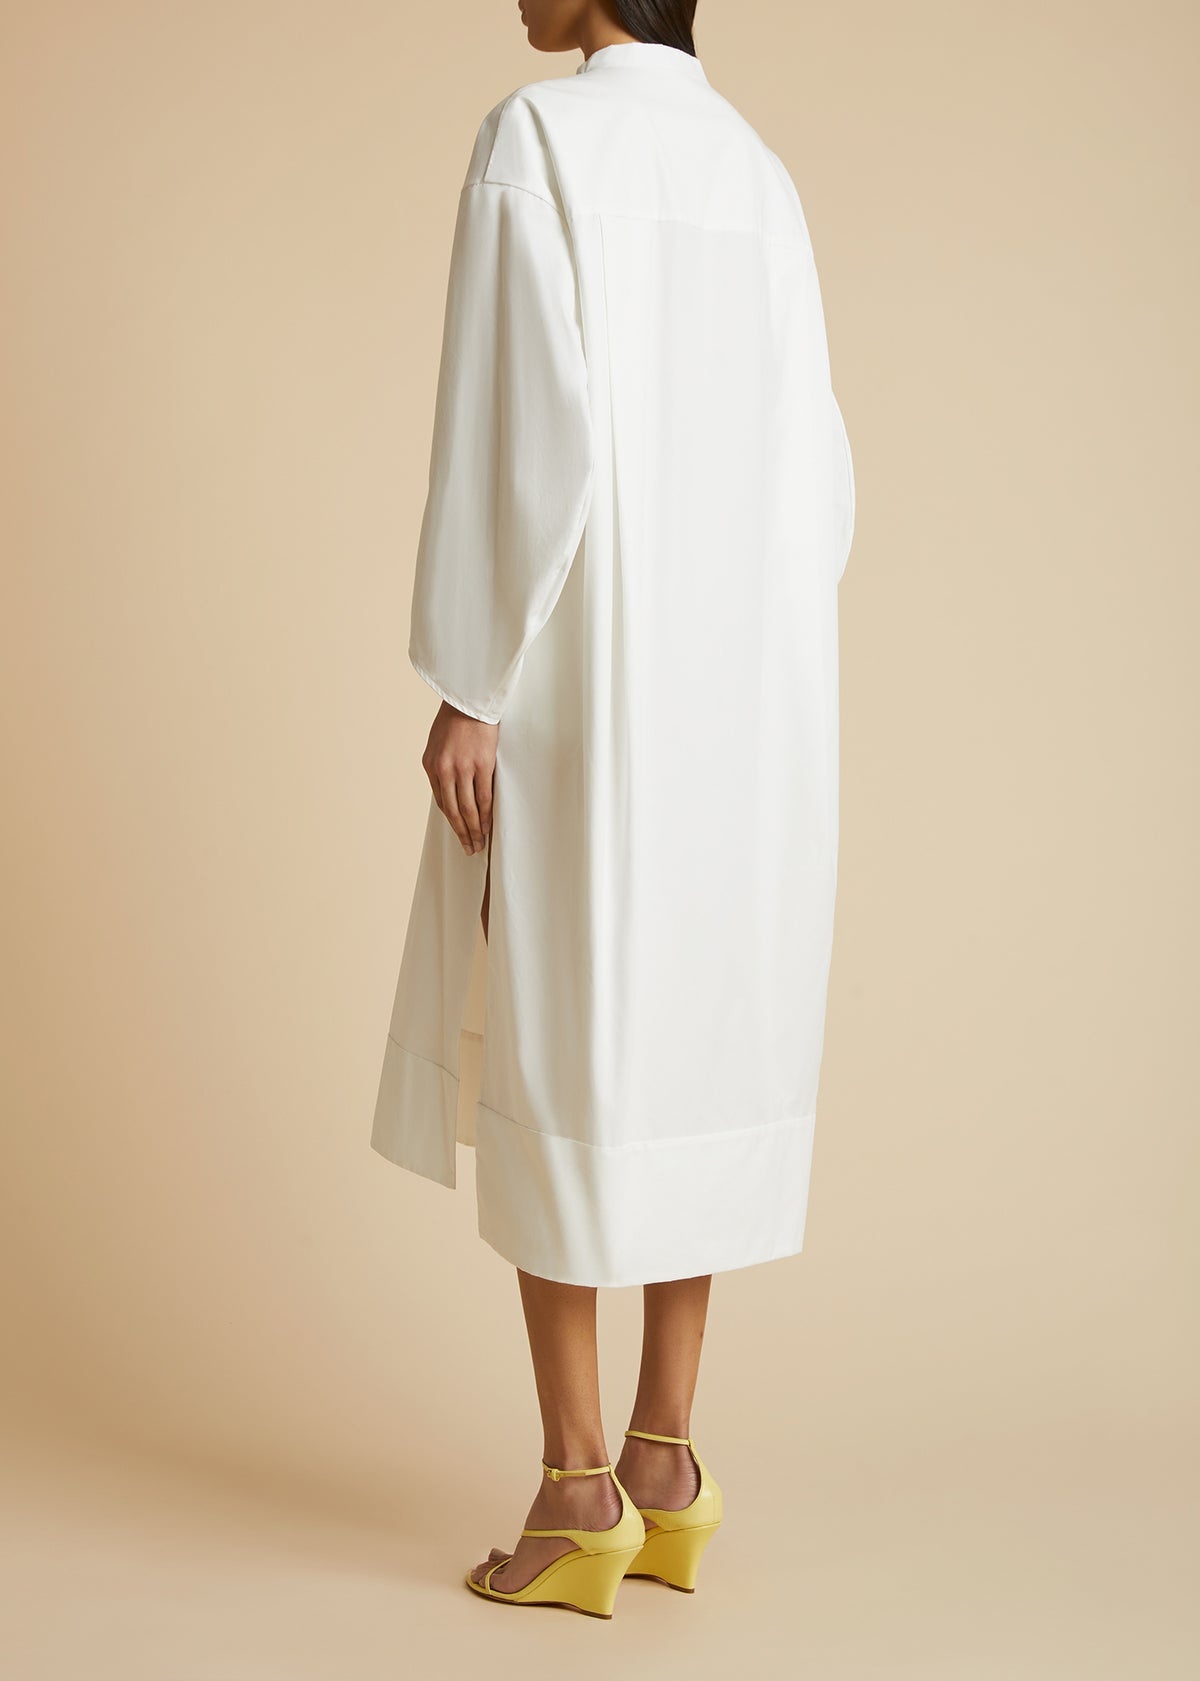 The Brom Dress in White - 3